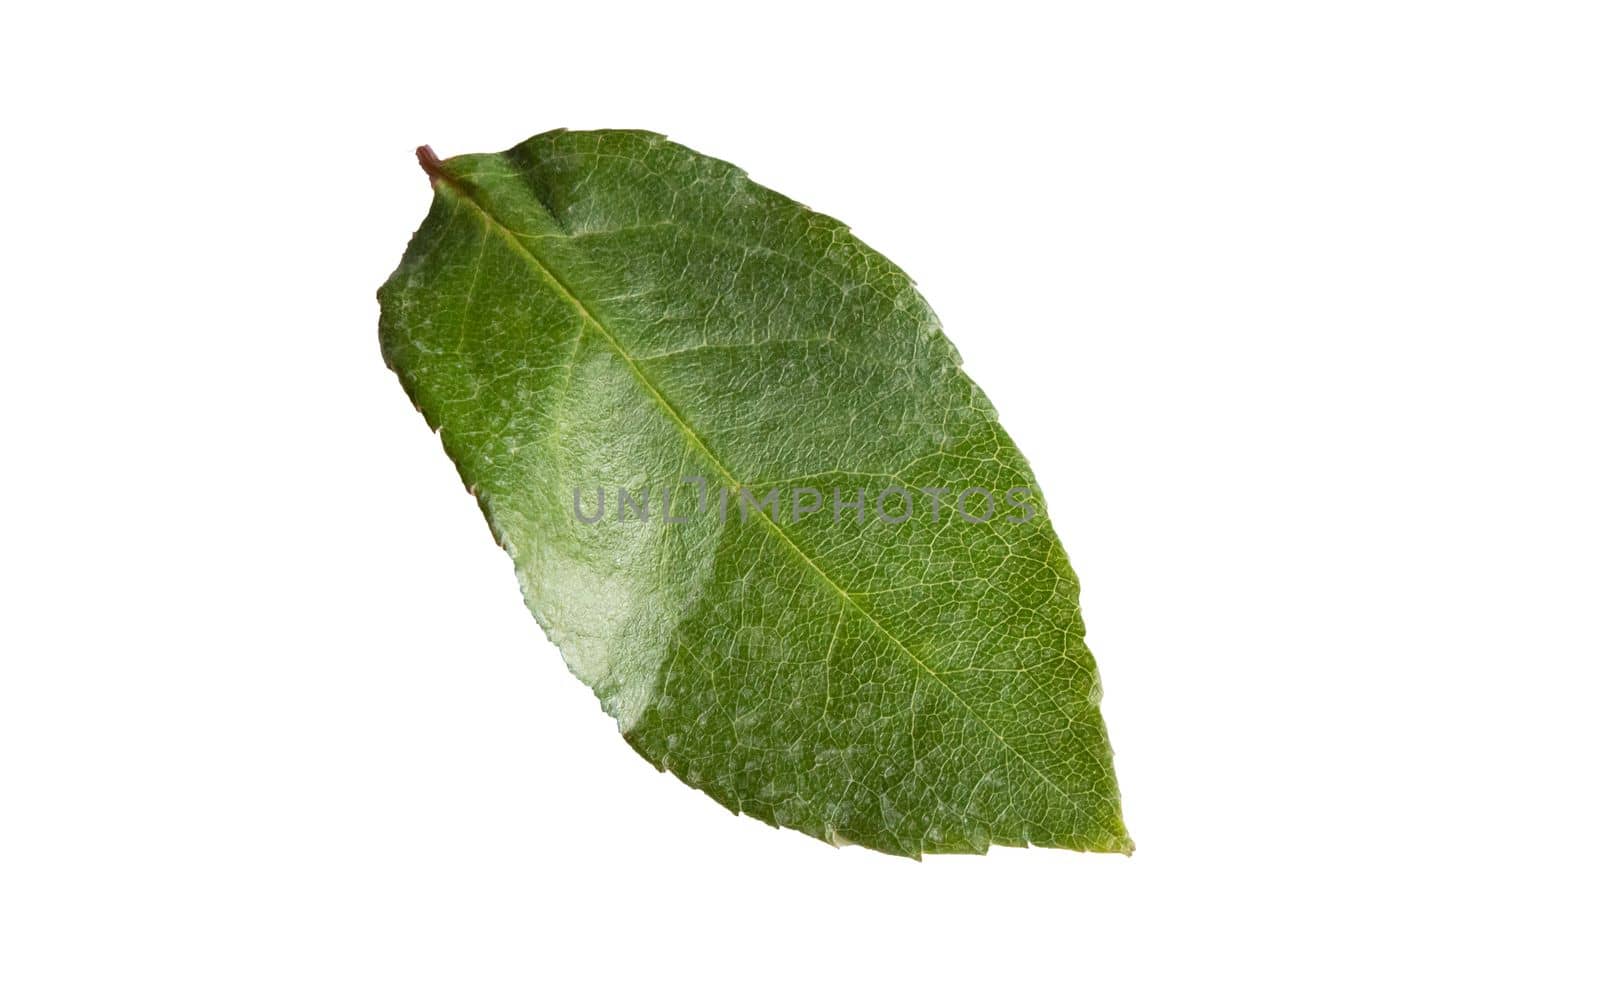 One green rose leaf on a white background, close-up, isolated by clipping.